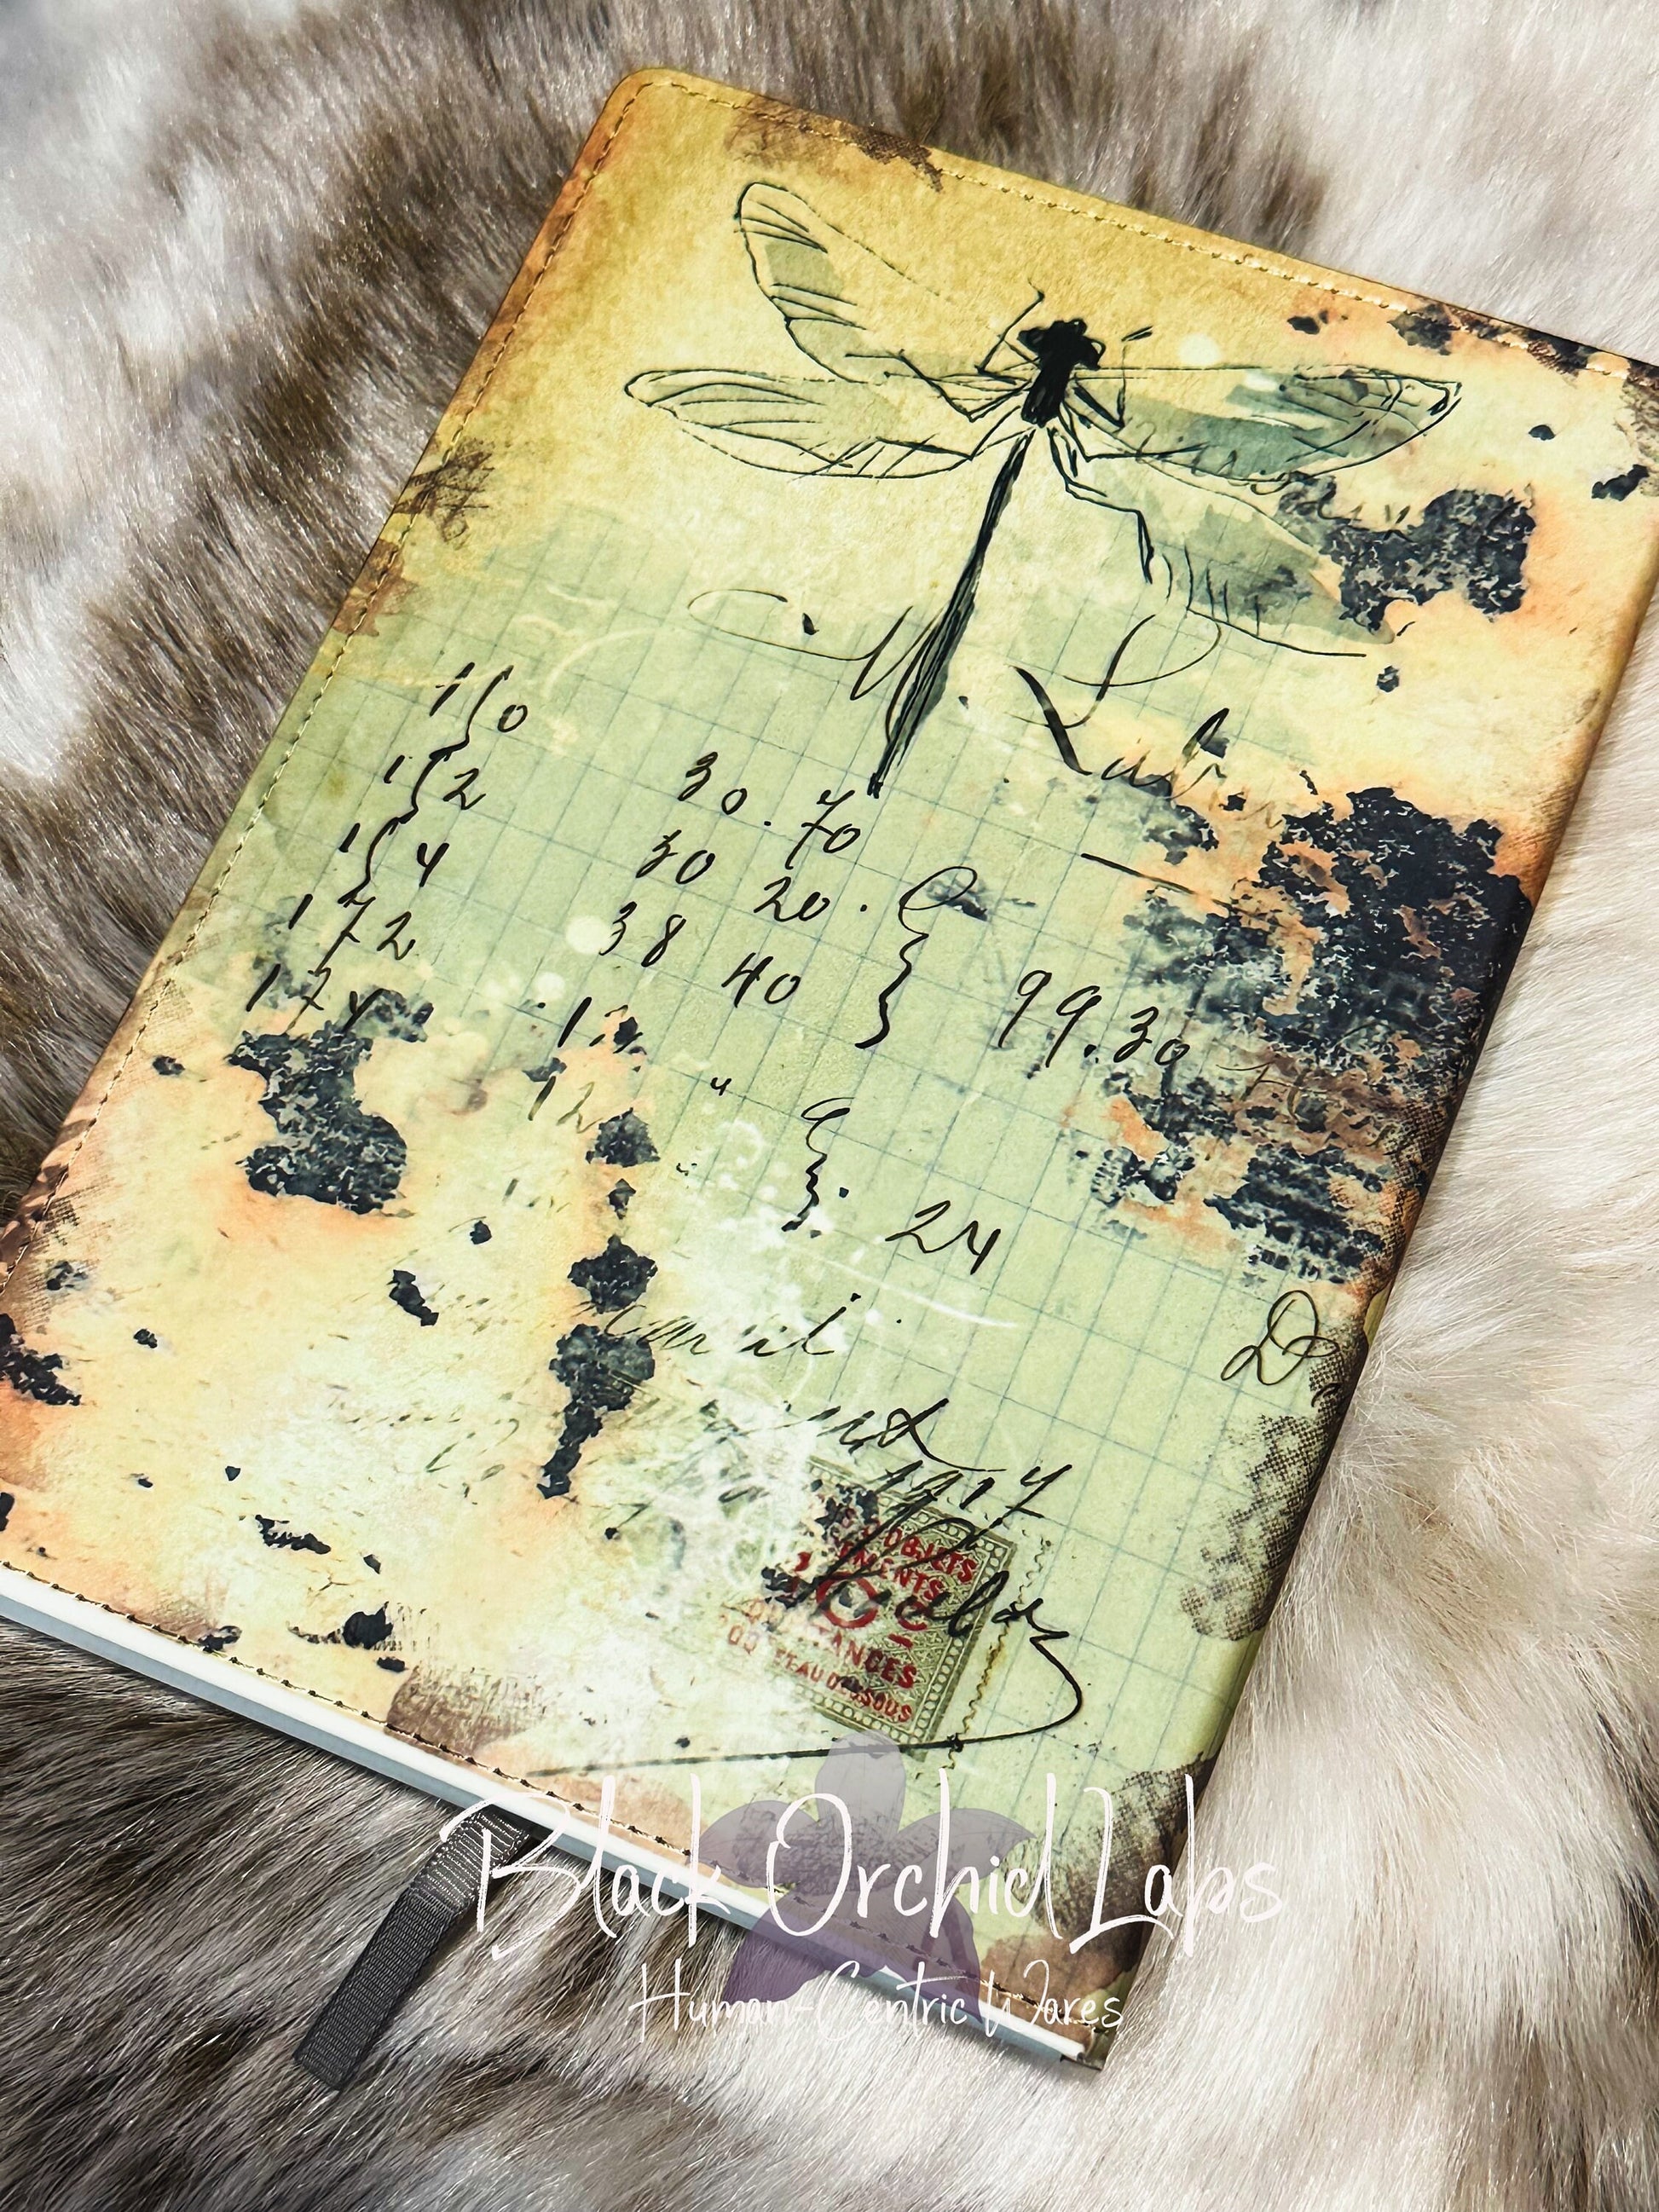 Butterfly Moth, cottagecore Vegan Leather Journal, 8”x6”, Dark Academia journal, goth, witchy, gift for her